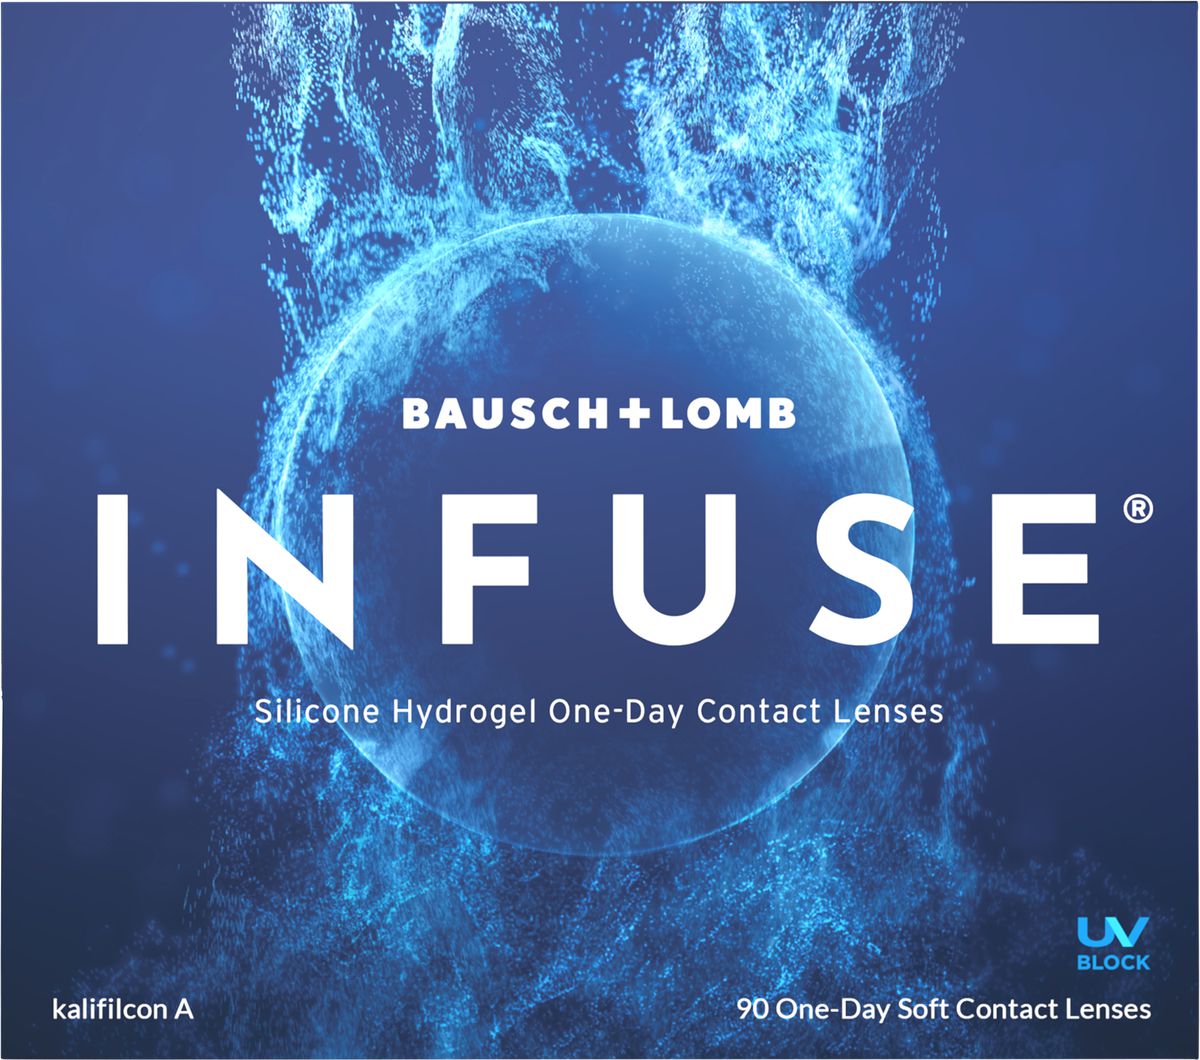 Bausch + Lomb INFUSE‚Ñ¢